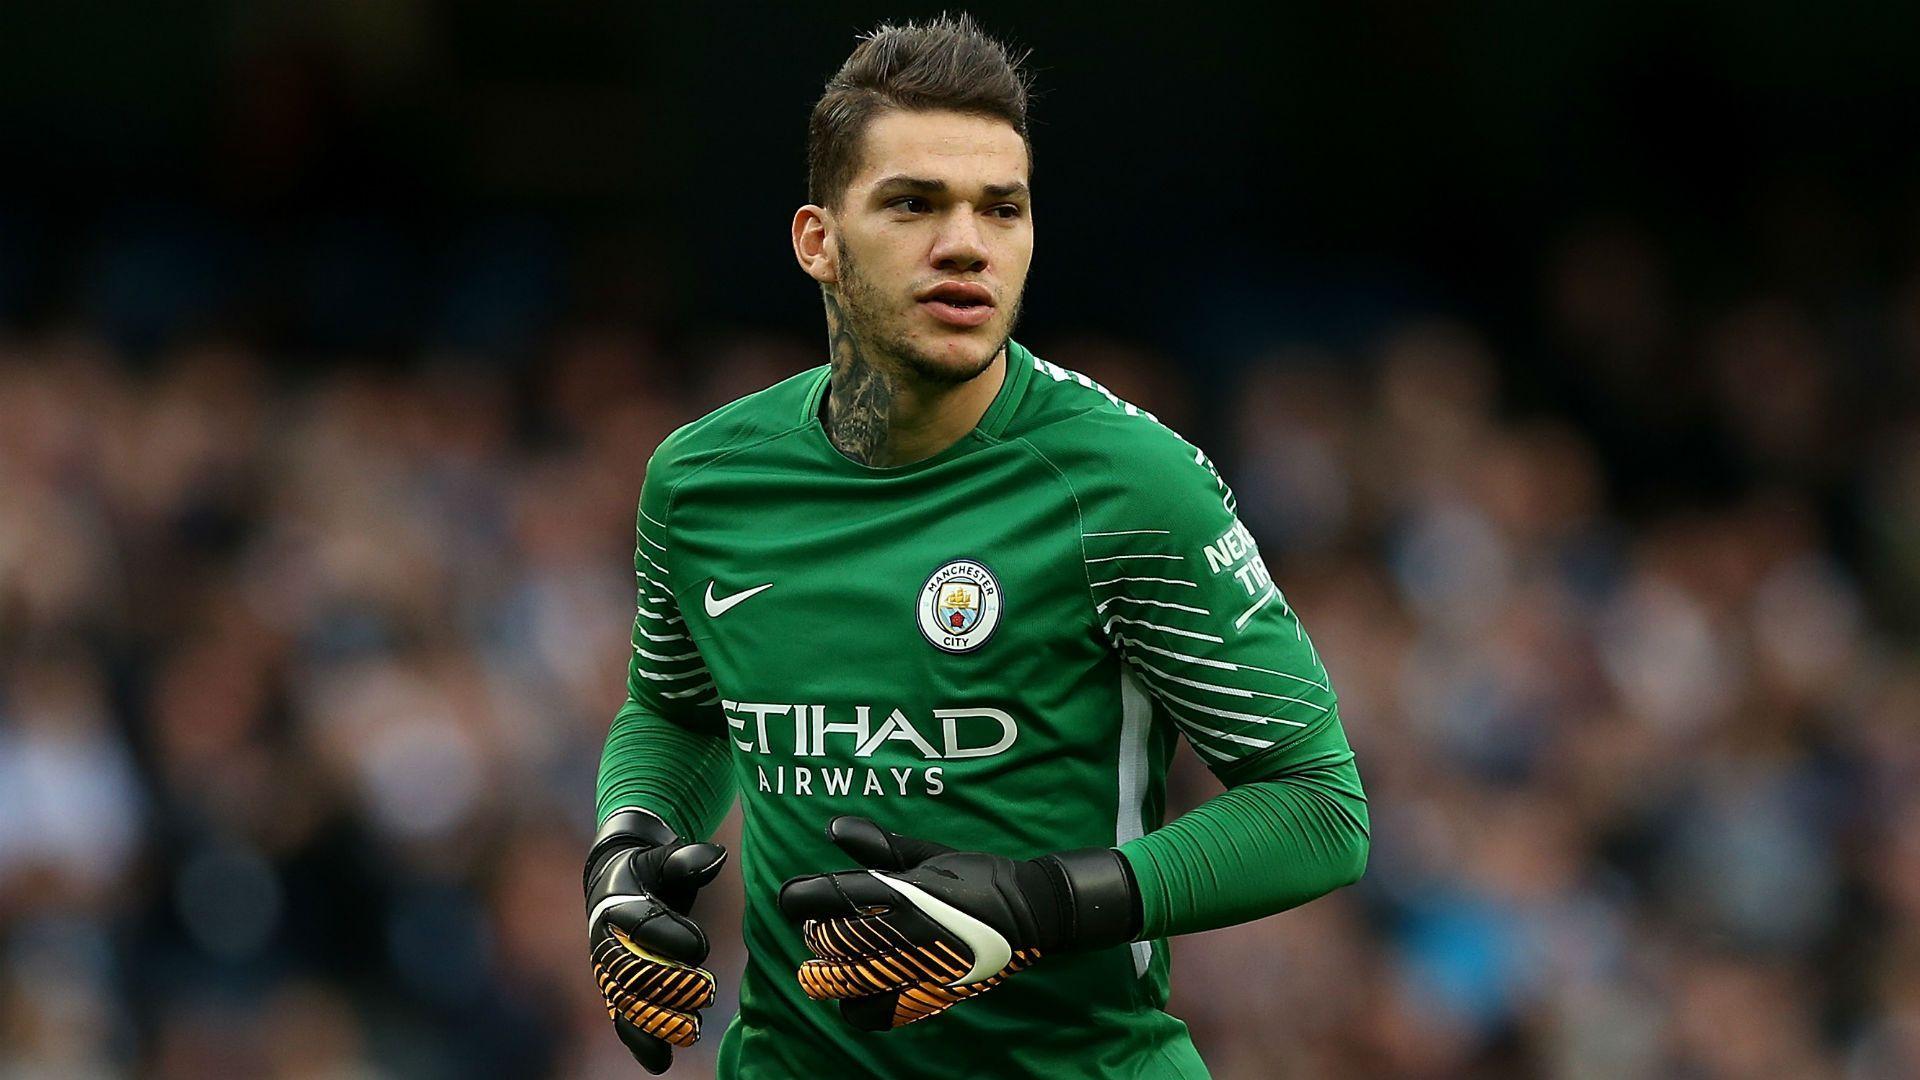 Ederson is already a complete goalkeeper